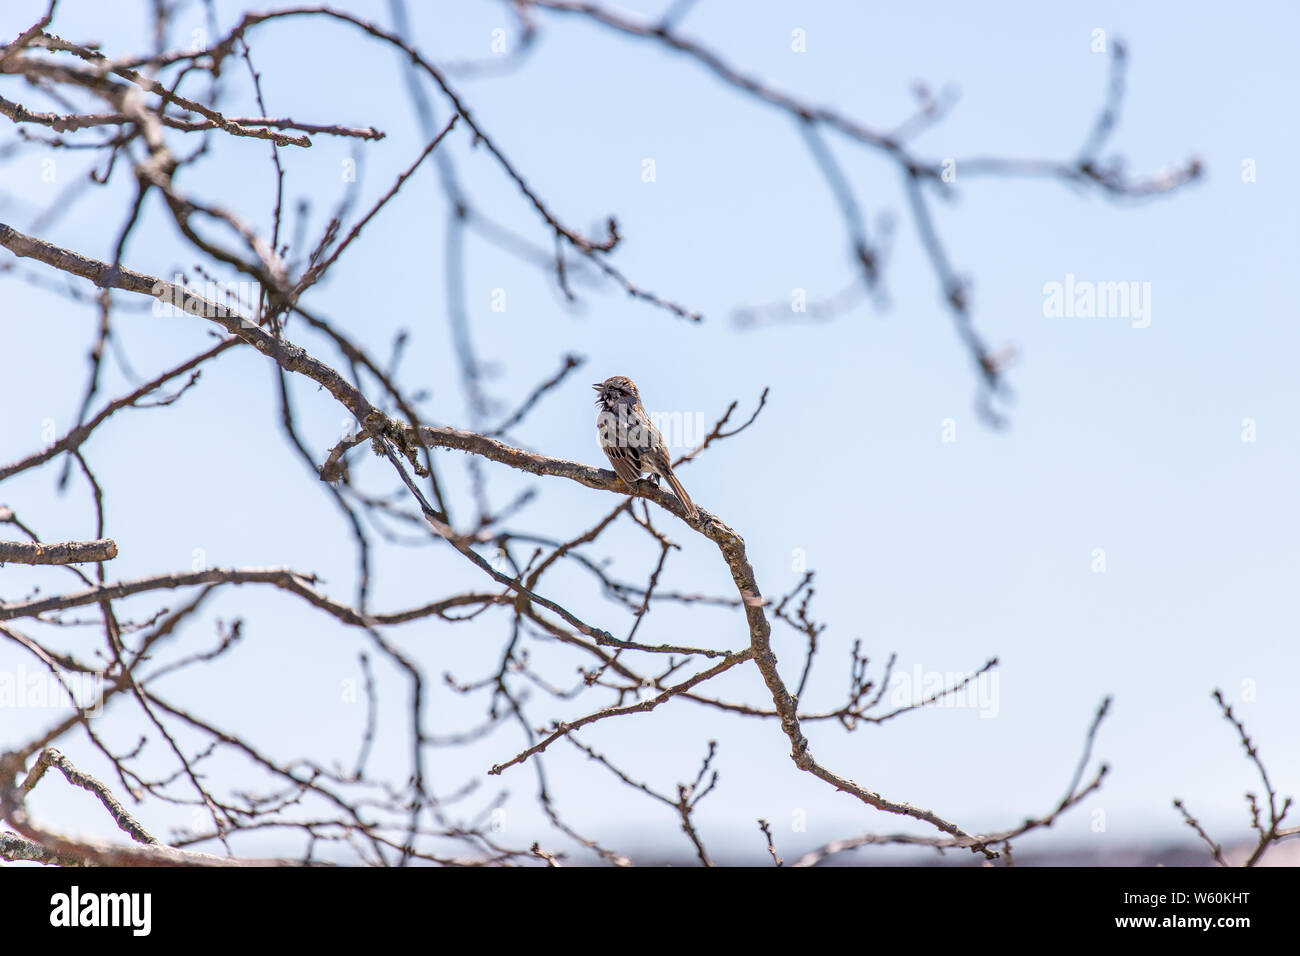 Small song bird perched on tree branches in Nantucket. Stock Photo